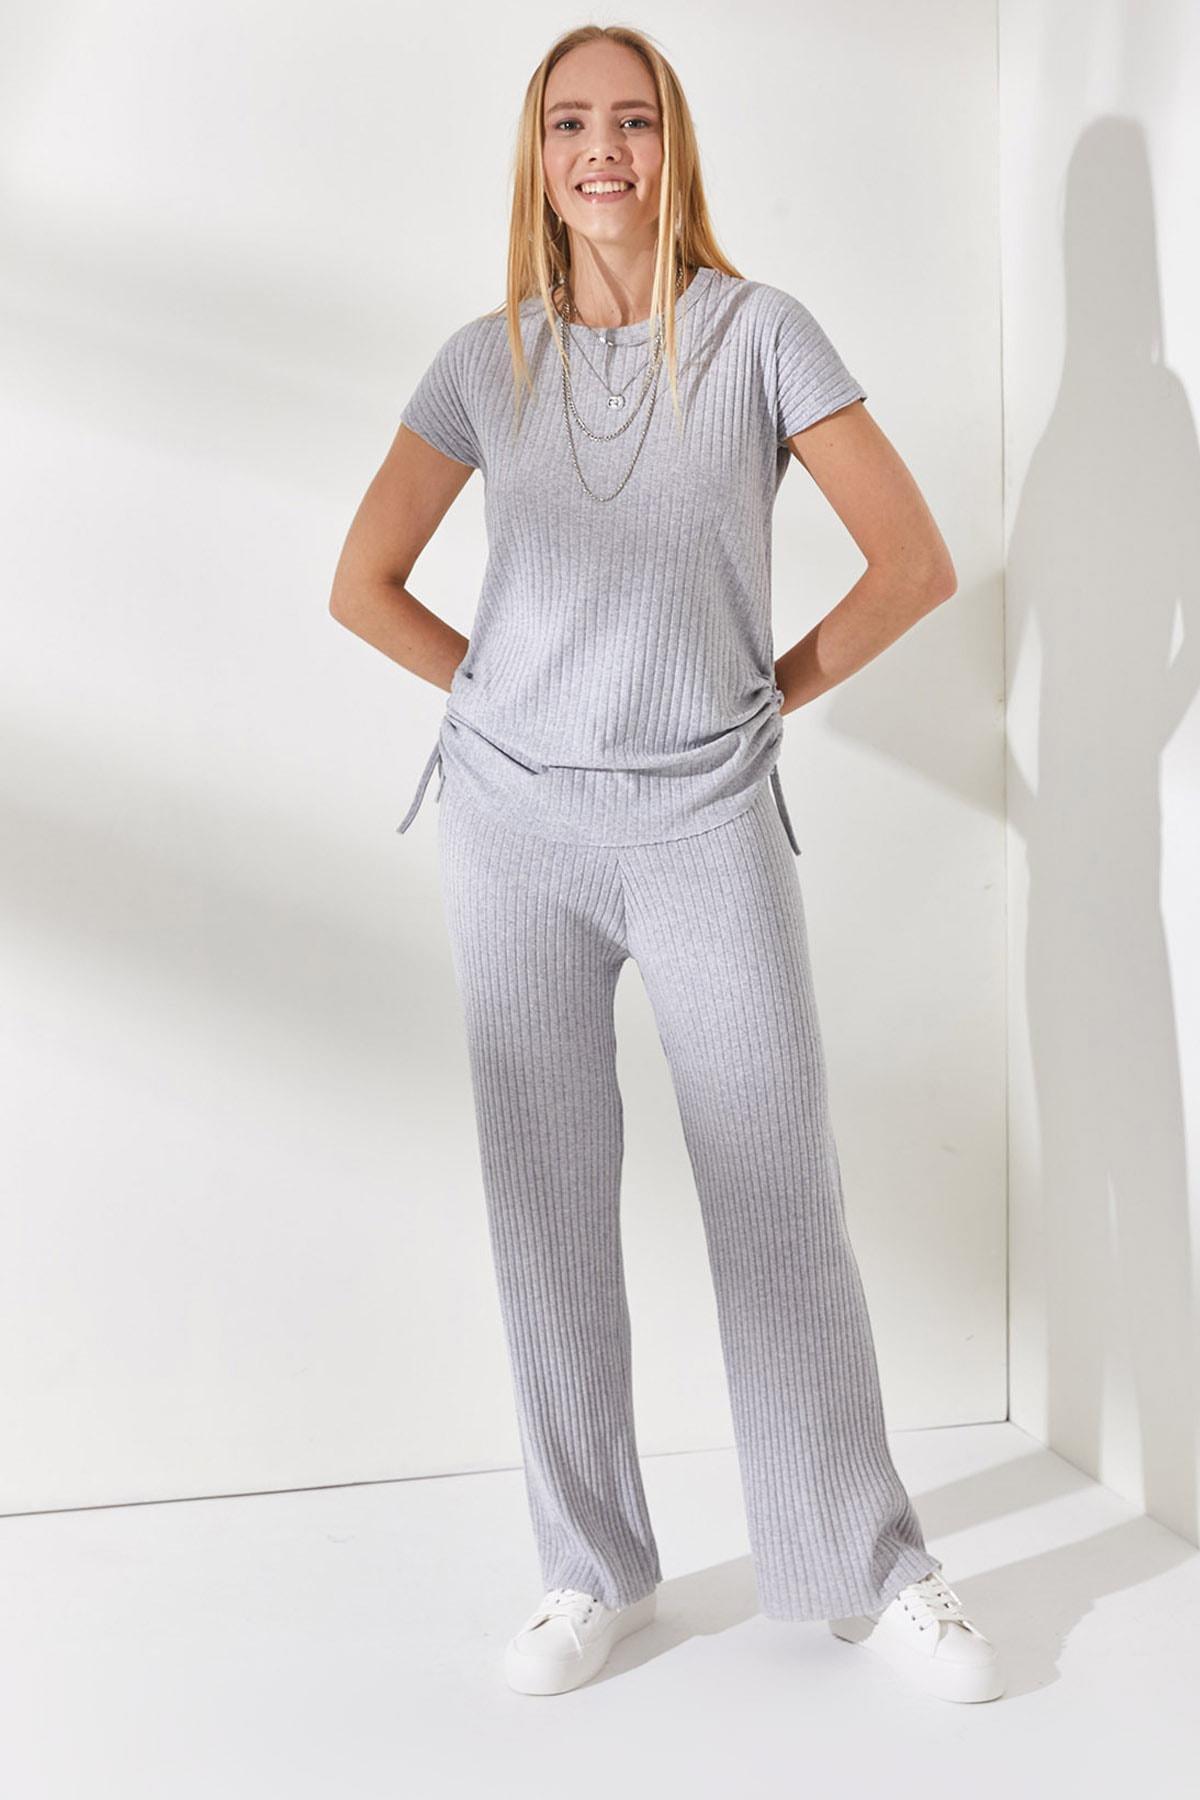 Olalook - Grey Shirred Sides Blouse Palazzo Pants Suit